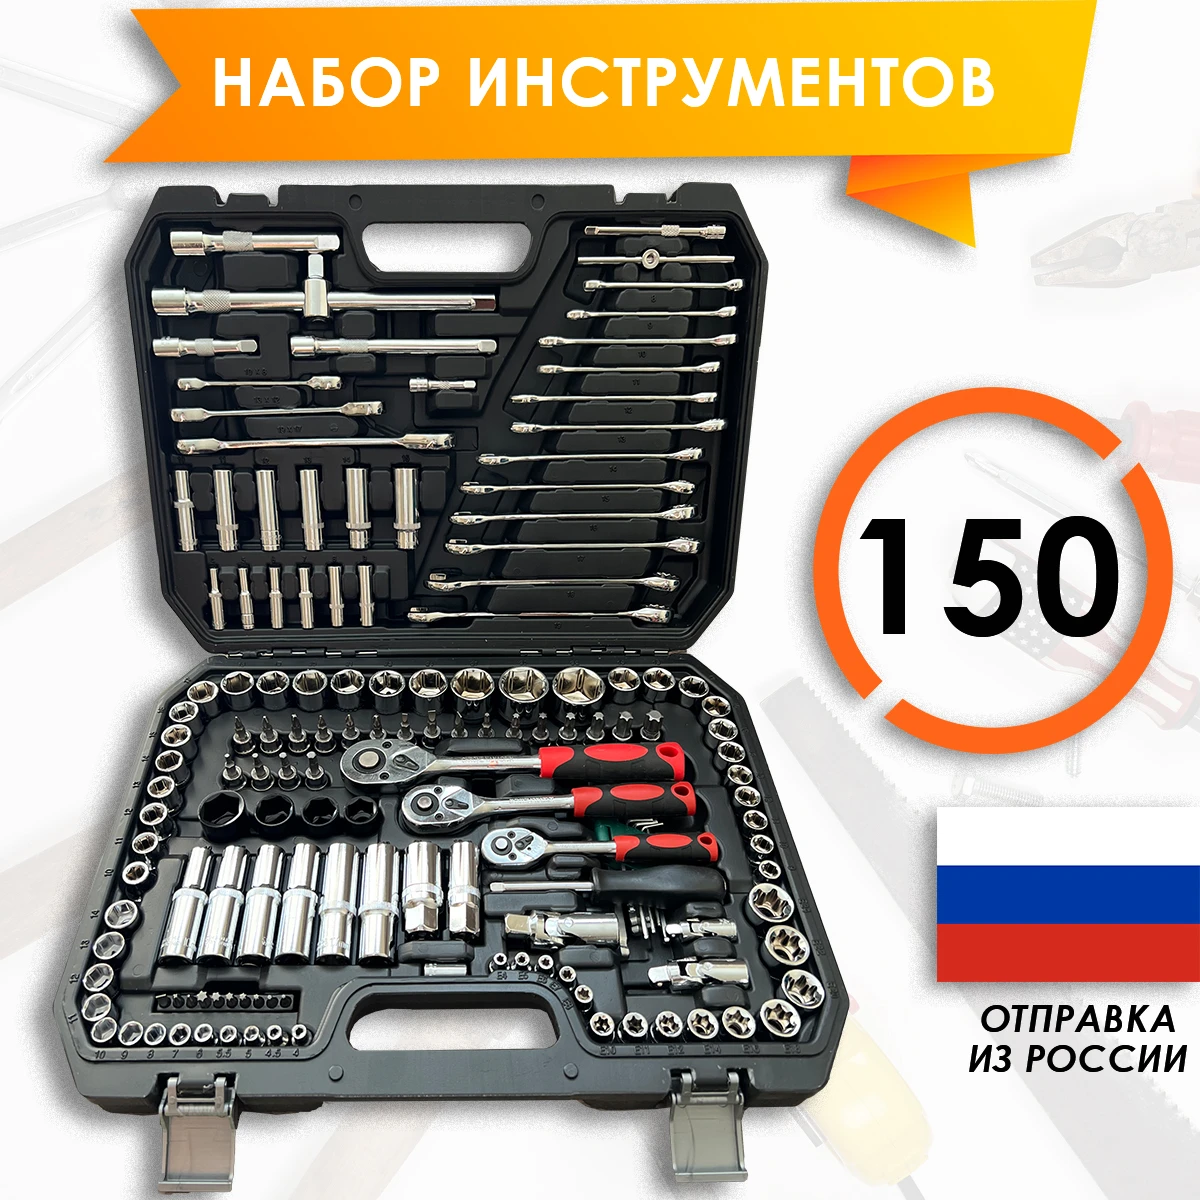 A set of auto tools, a set of heads and keys for car repair